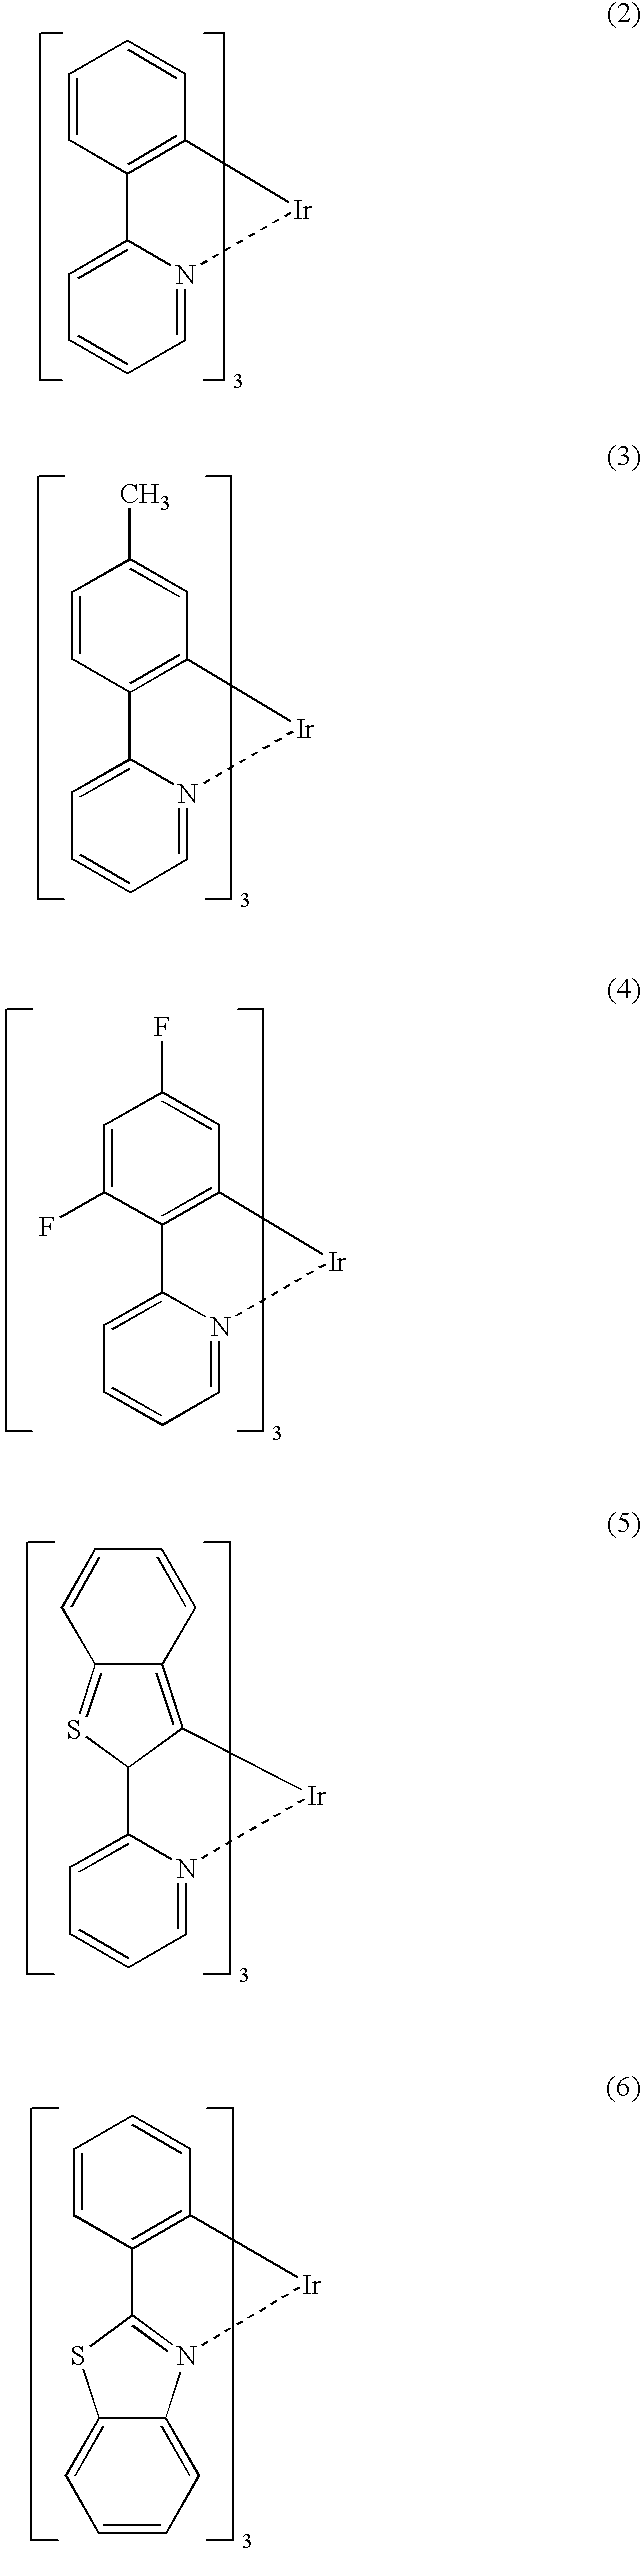 Process for Producing Ortho-Metalated Complex of Iridium With Homoligand